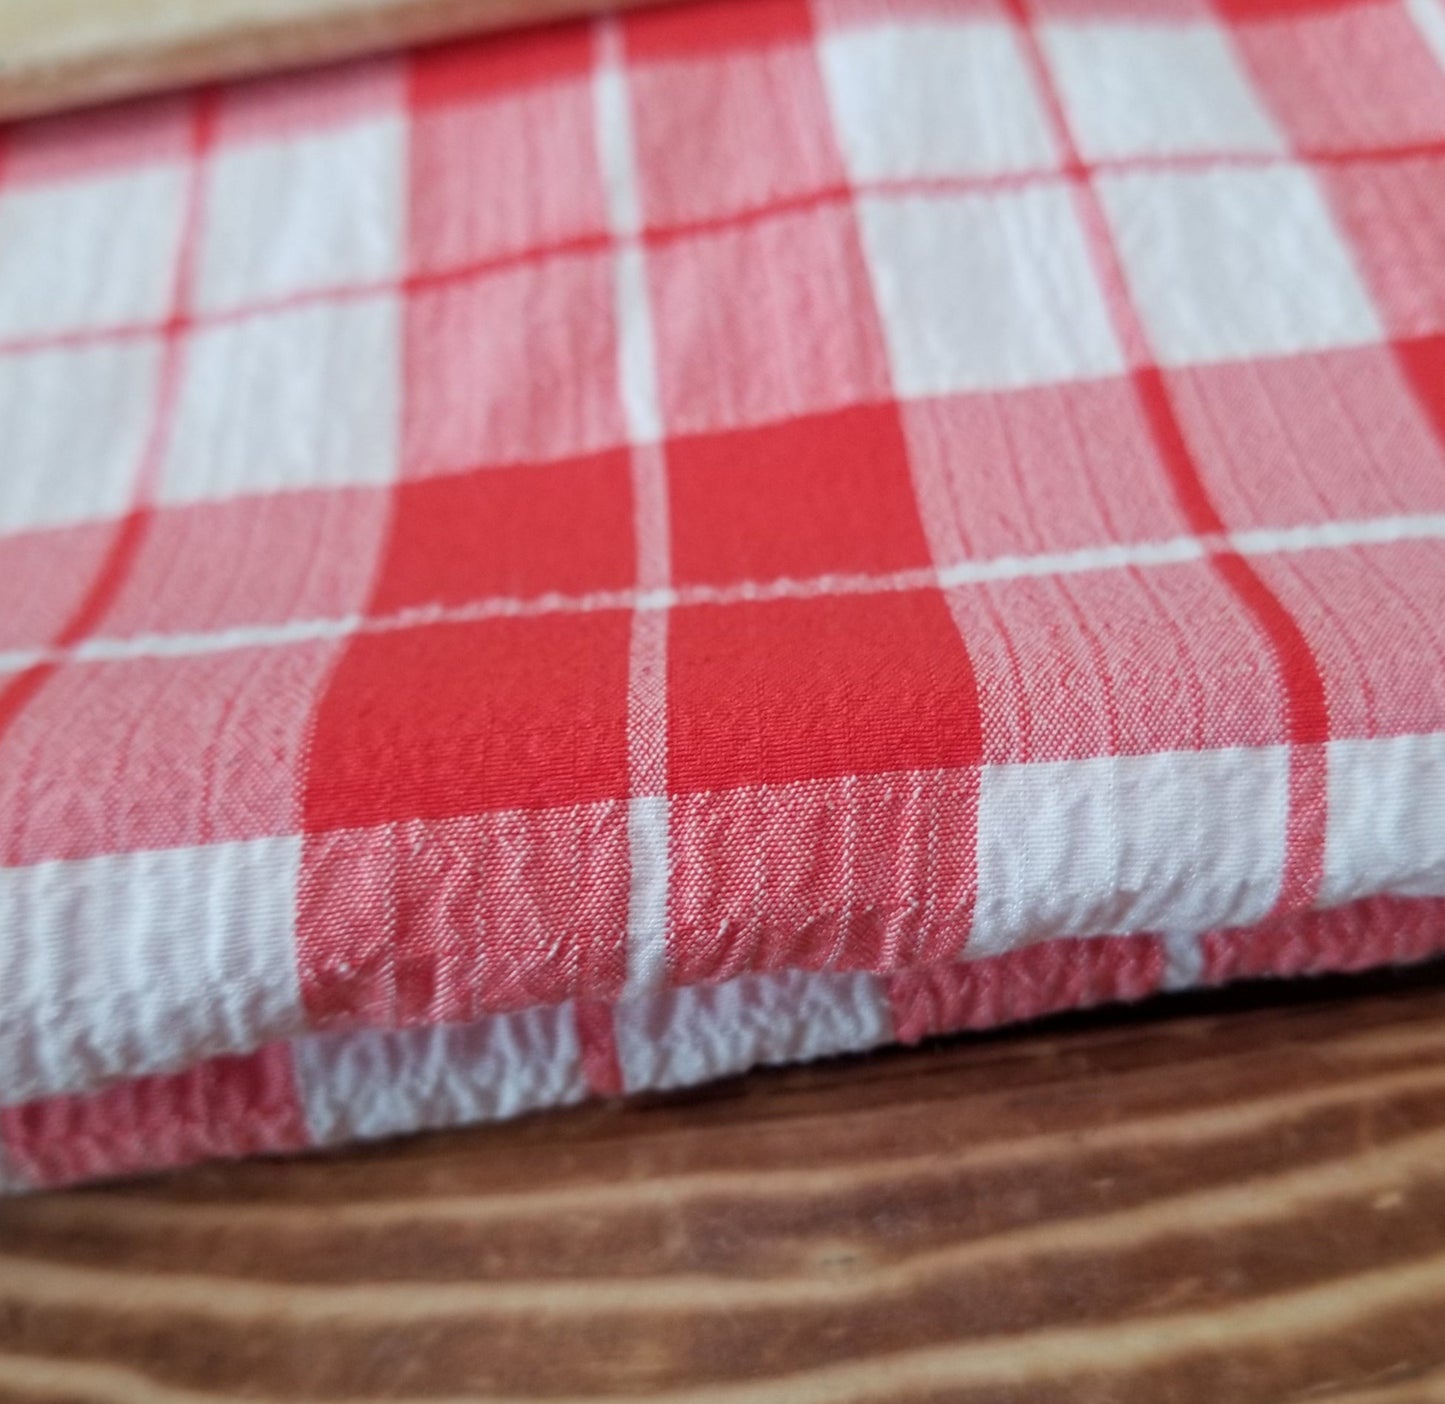 Designer Deadstock  Apple Red Picnic Gingham White Textured Seersucker Poly Rayon Spandex Woven- price per yard